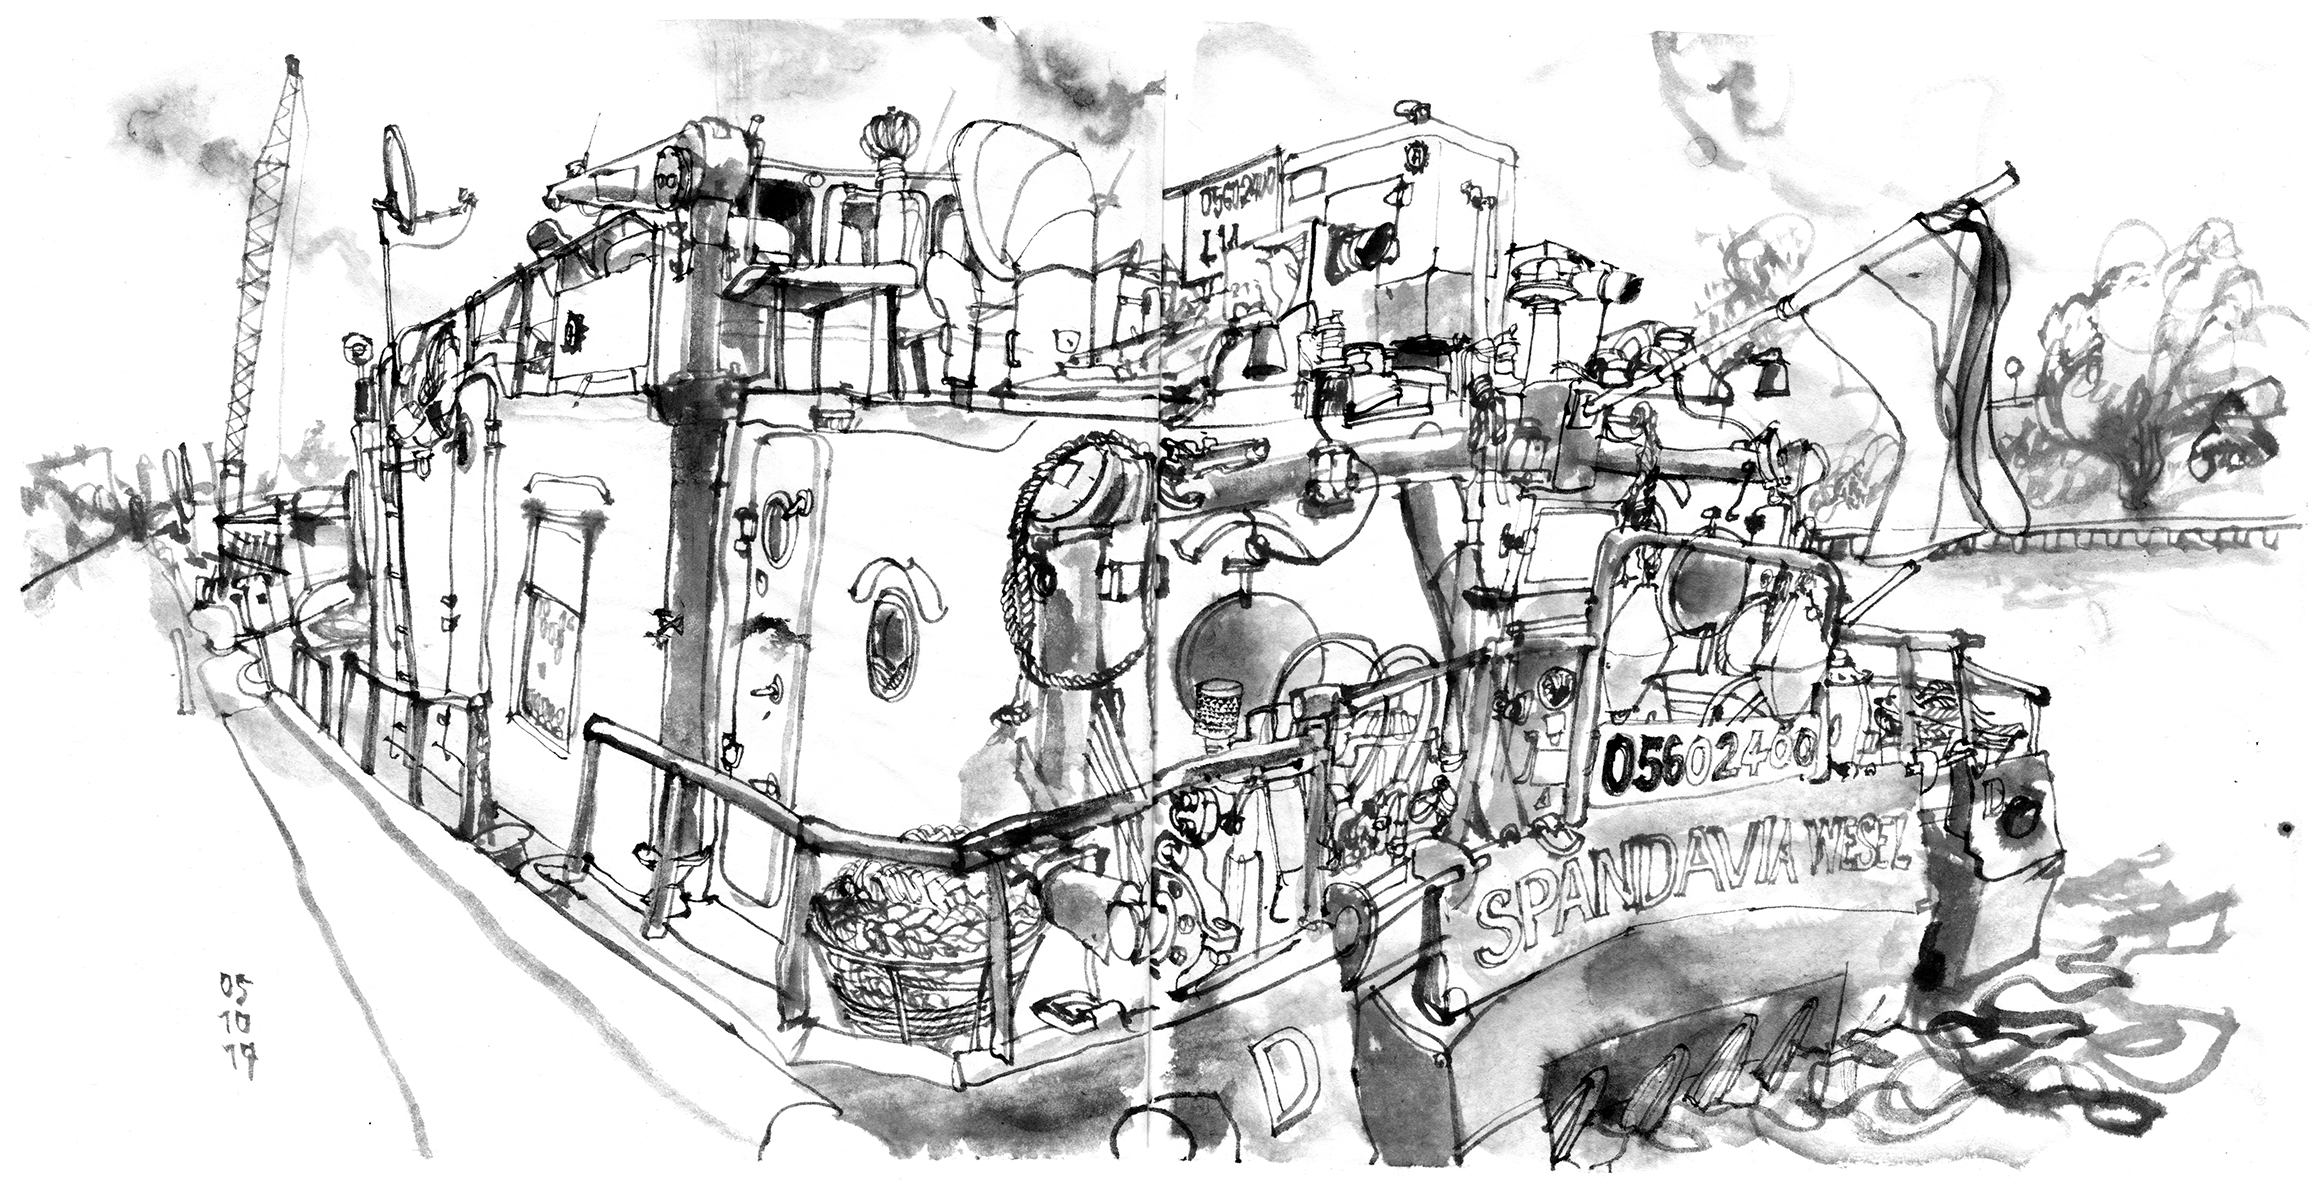 Ink drawing of a tucker boat mured to the bank of a canal. The boat has lettering on the tail side, 'SPANDAVIA WESEZ`and a number (05602460), there is a flag and lots of equipment, ropes and stuff. In the background is a crane by the canal.